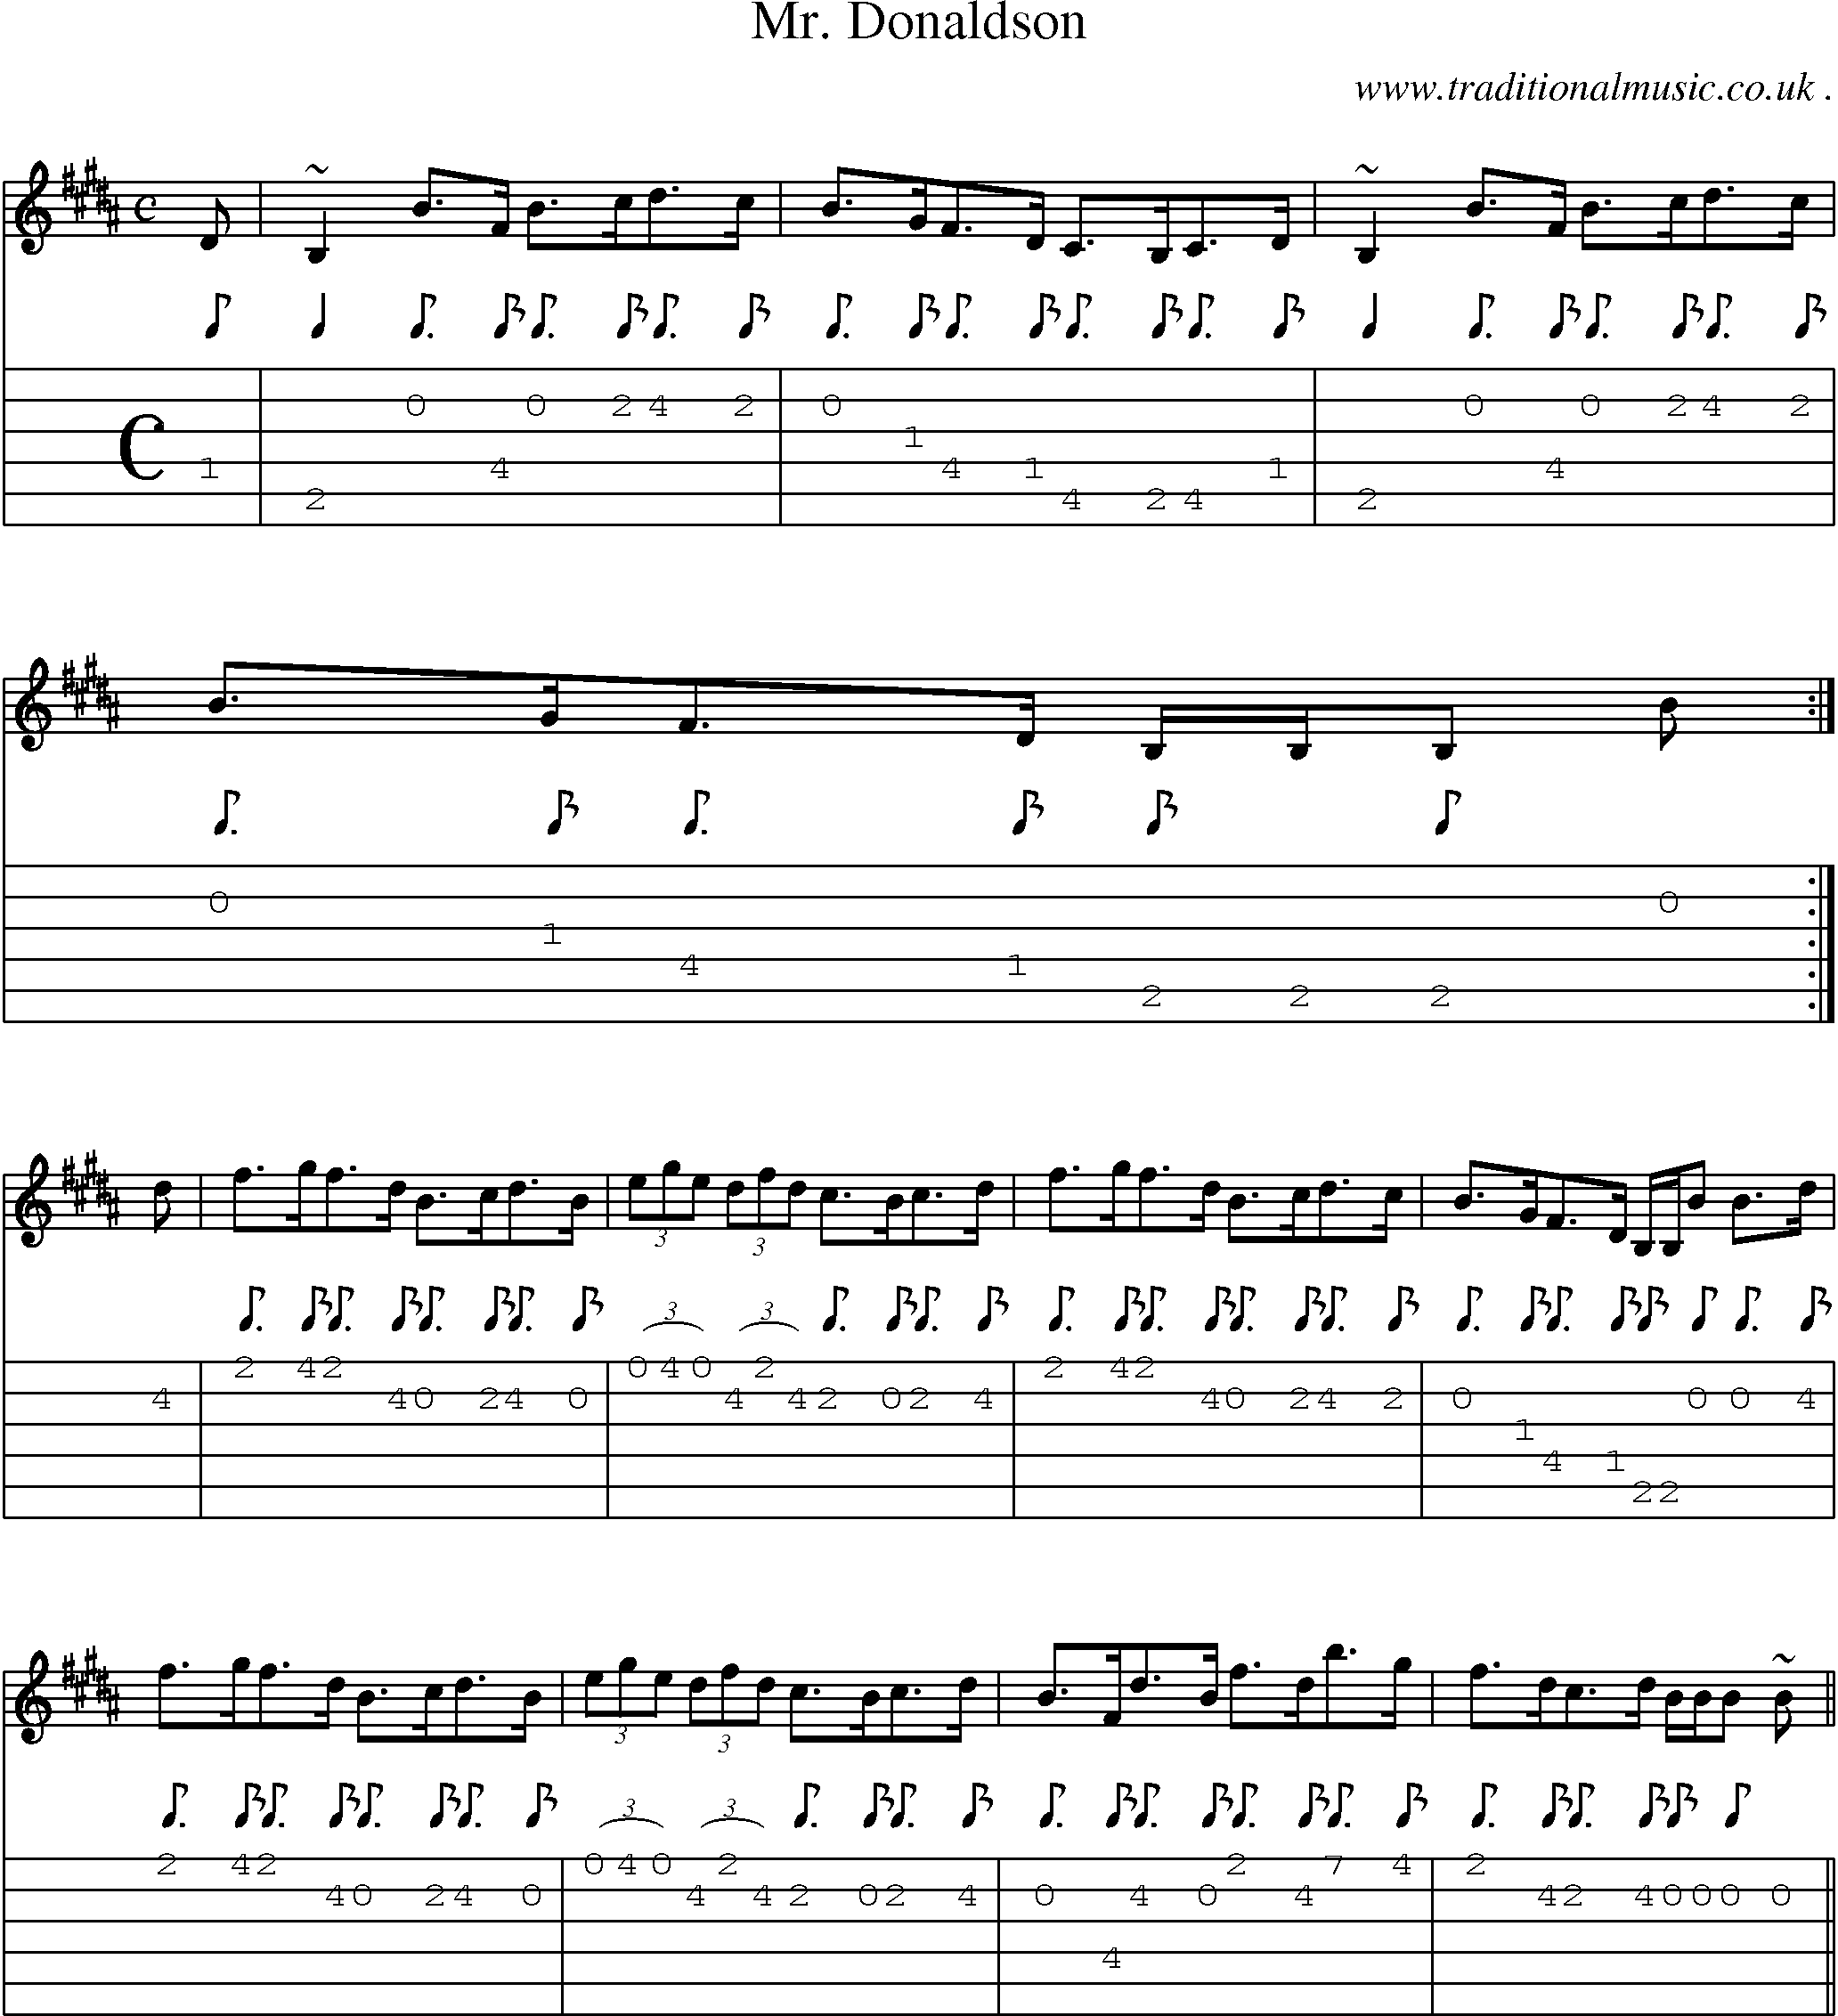 Sheet-music  score, Chords and Guitar Tabs for Mr Donaldson